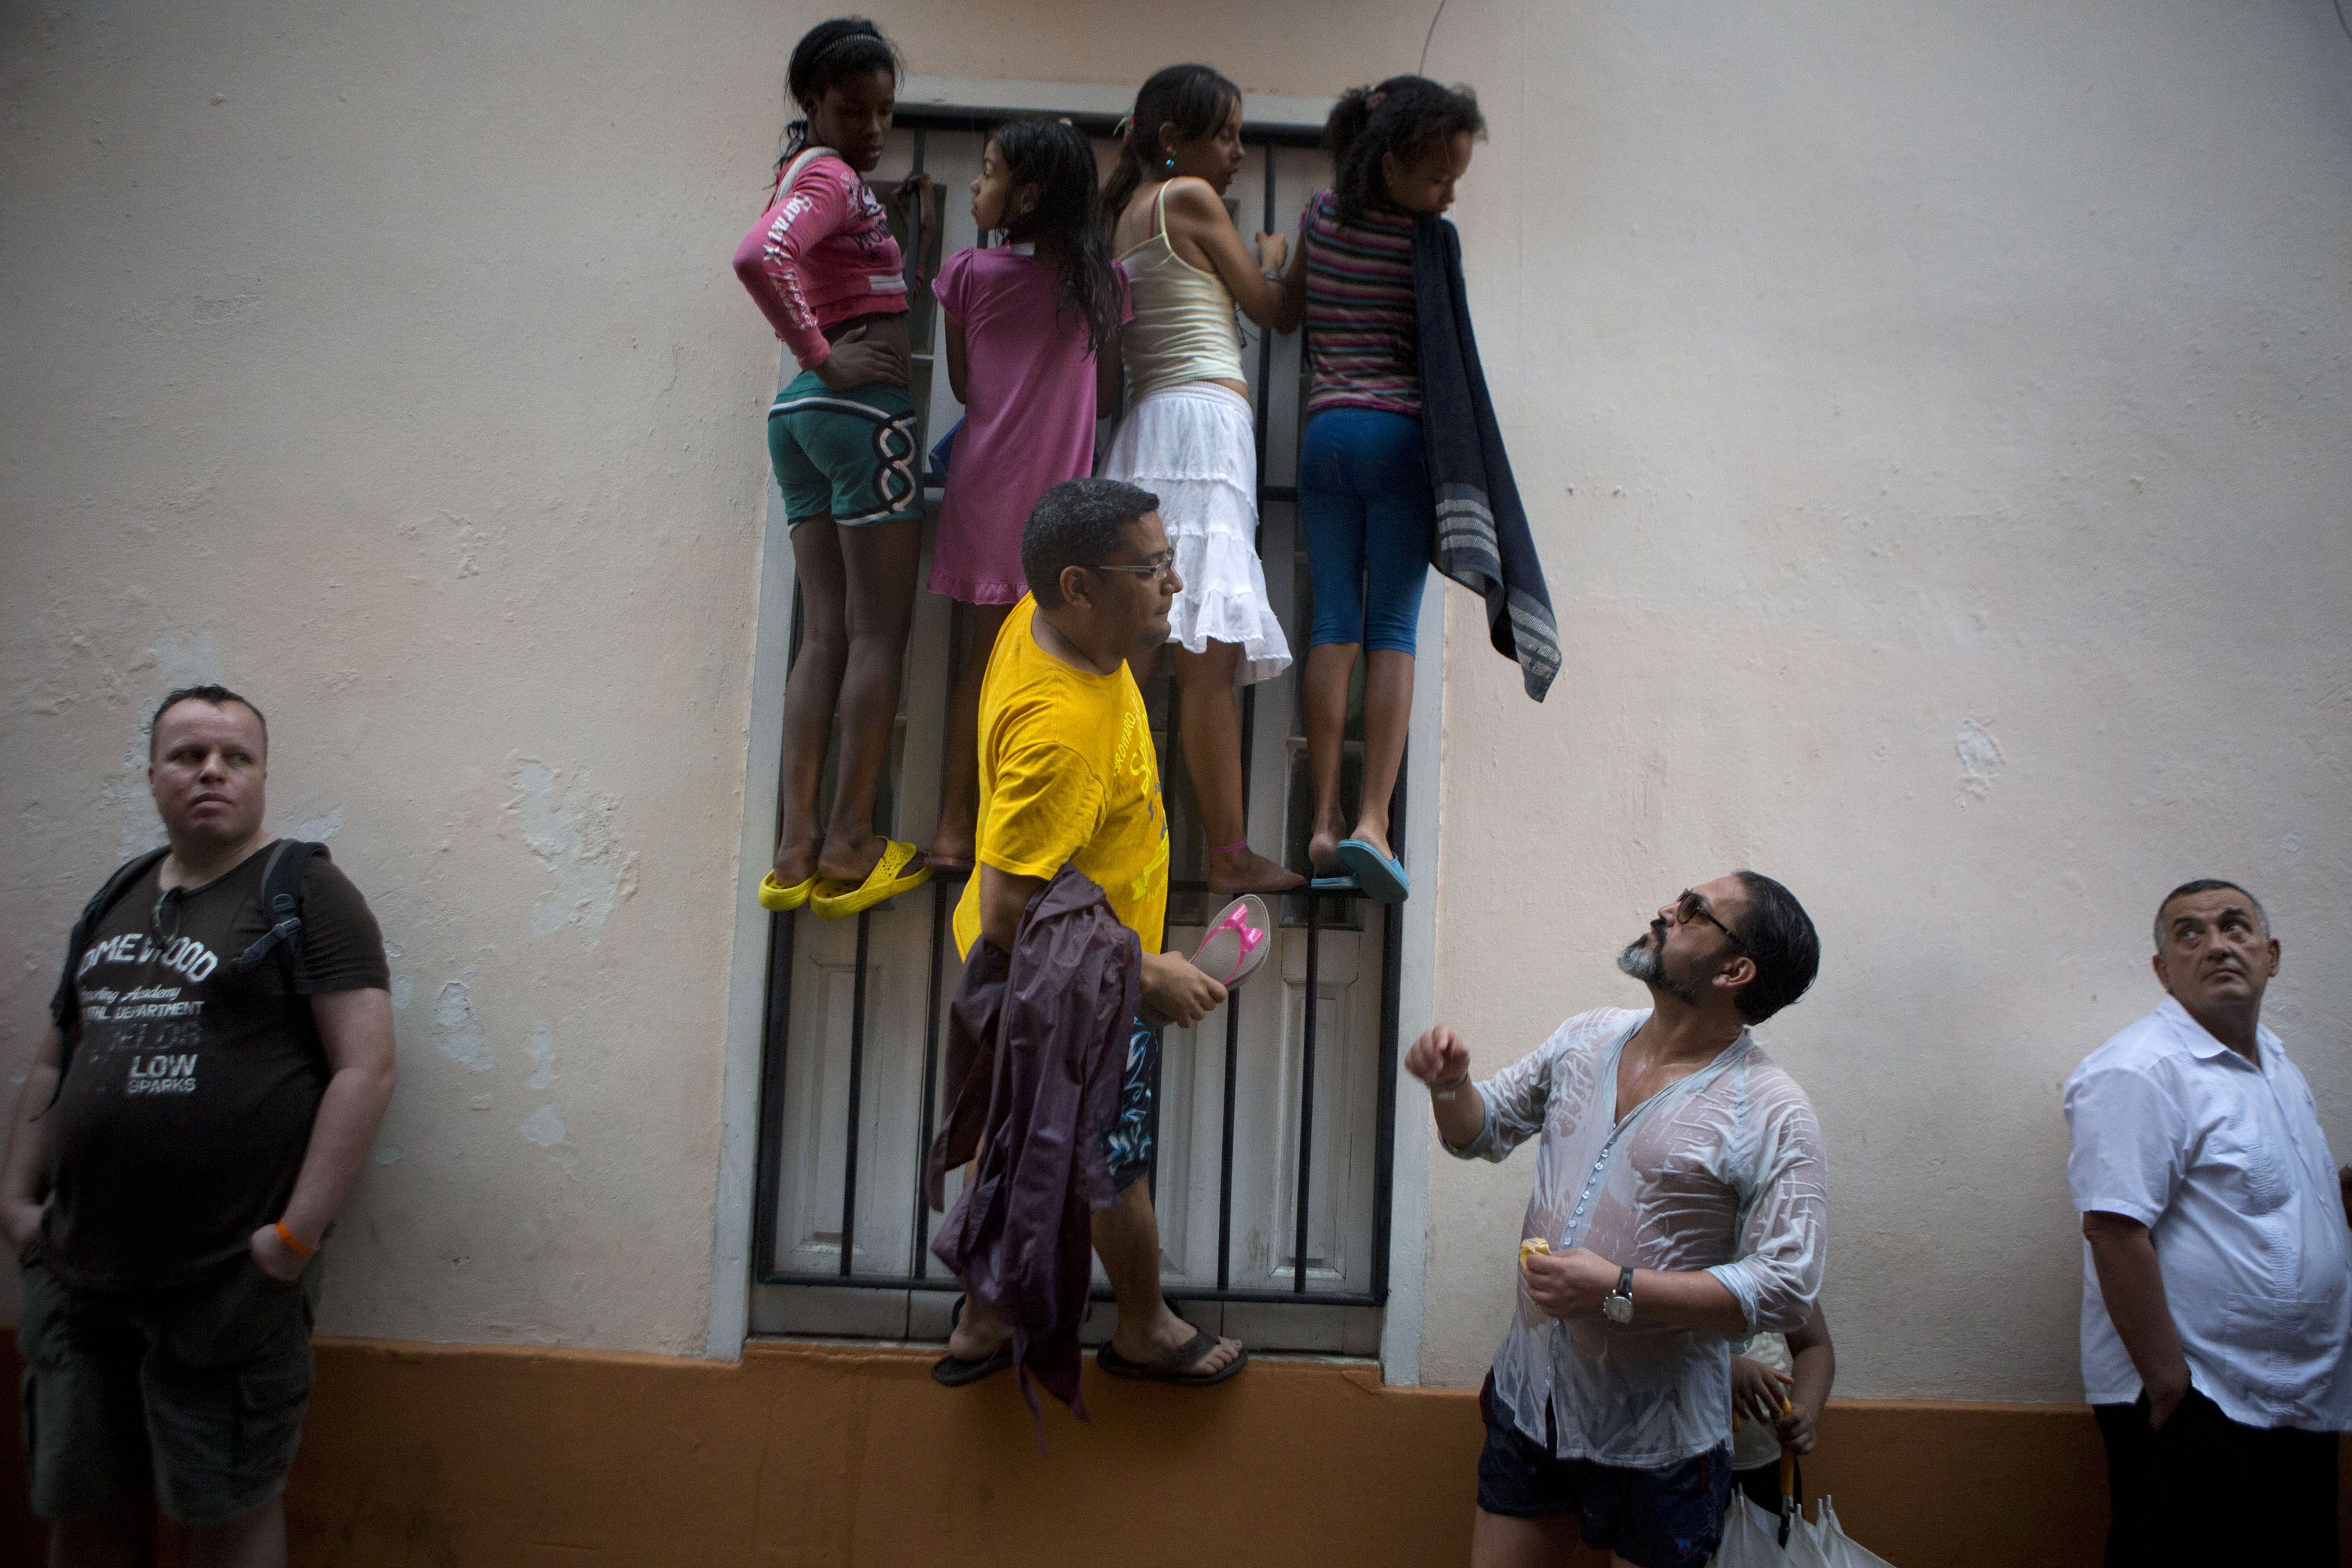 People climb a window grate as they get wet in the rain, in hopes of catching a glimpse of President Barack Obama during his visit to Cathedral Square in Old Havana, Cuba, Sunday, March 20, 2016. Obama's trip is a crowning moment in his and Cuban President Raul Castro's ambitious effort to restore normal relations between their countries. (AP Photo/Rebecca Blackwell)